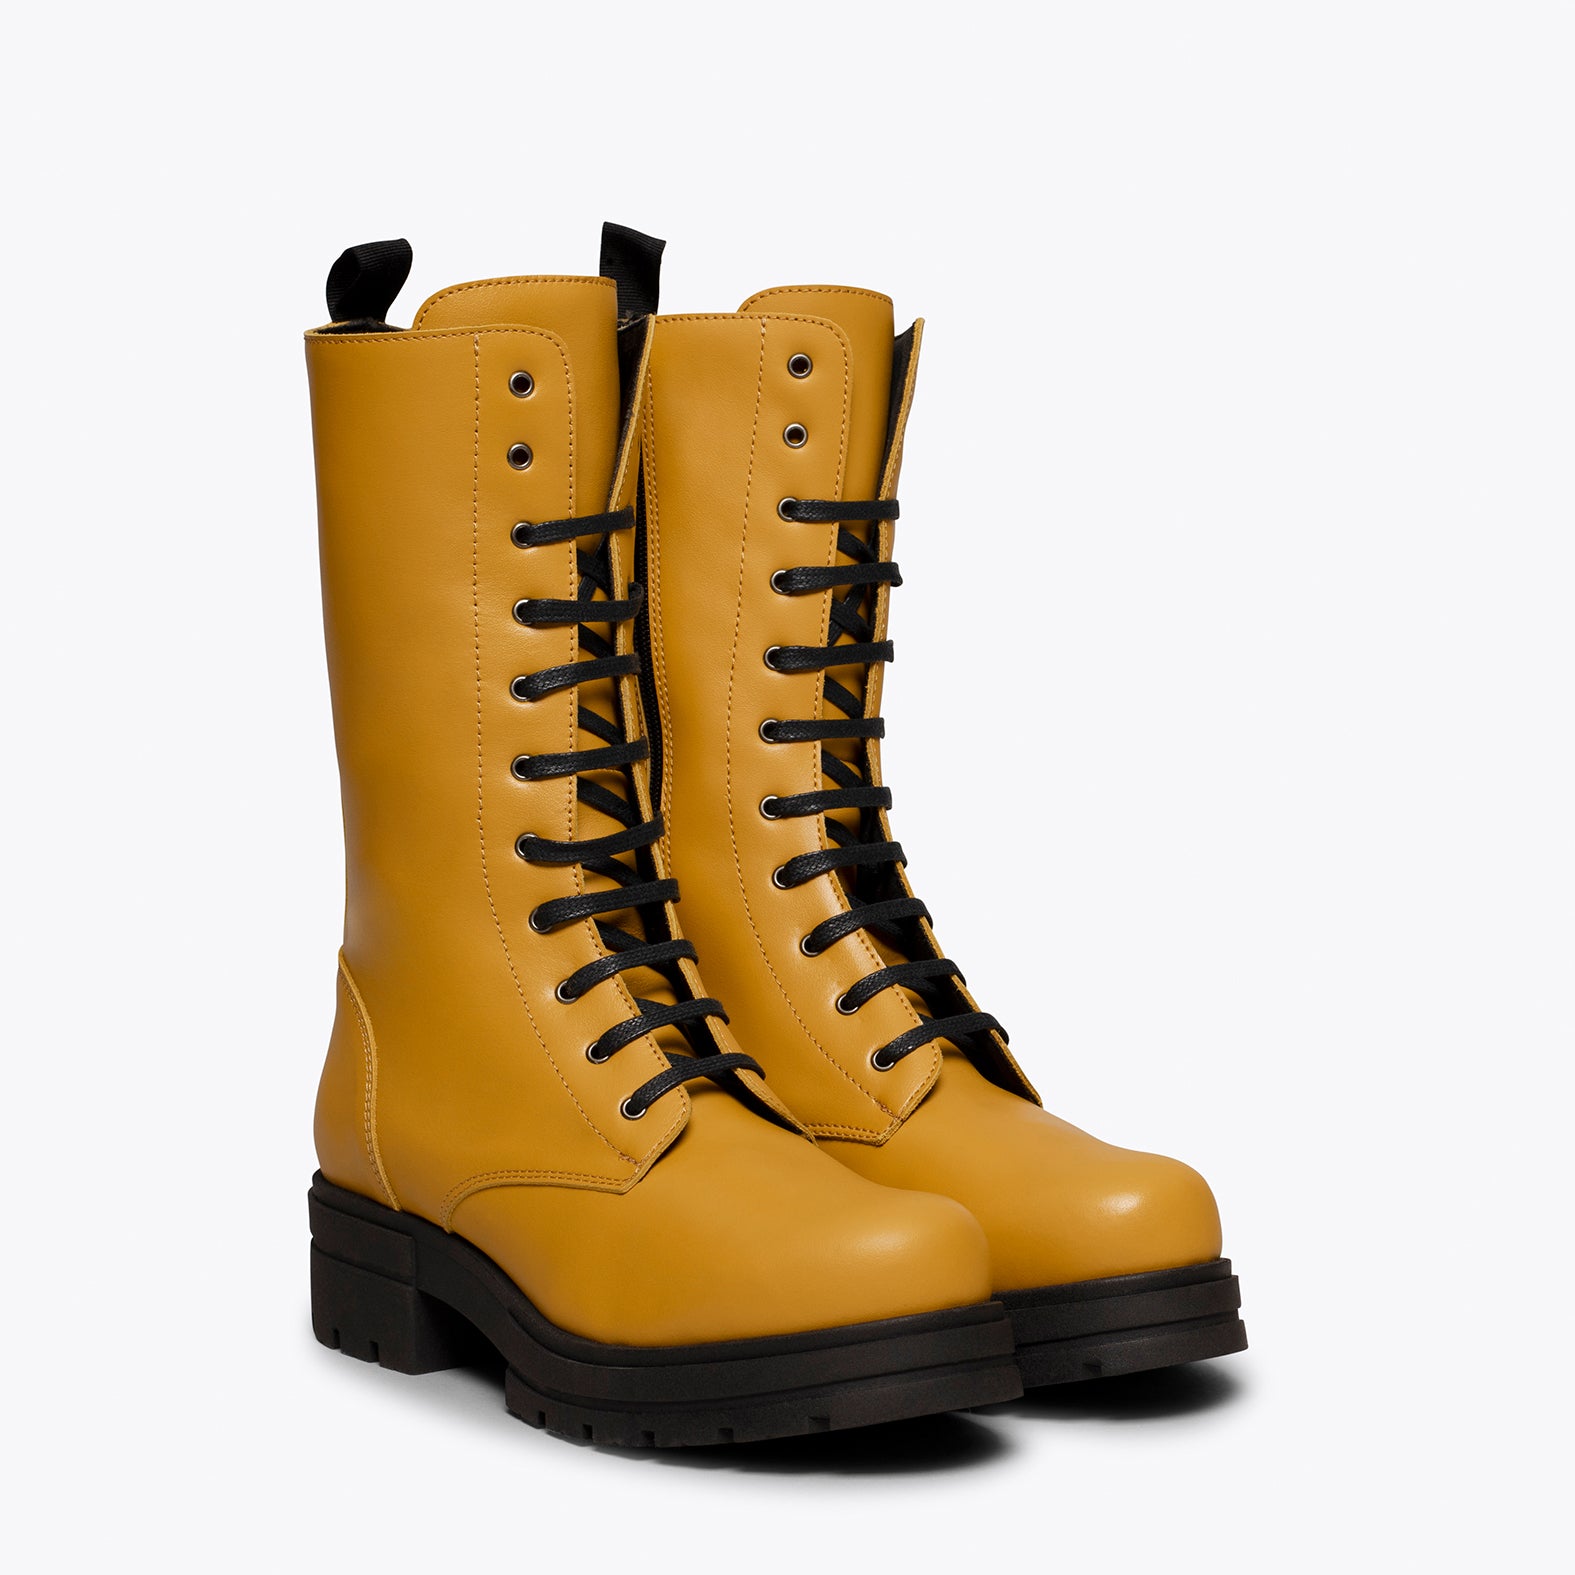 ARMY – MUSTARD high militar boot with laces